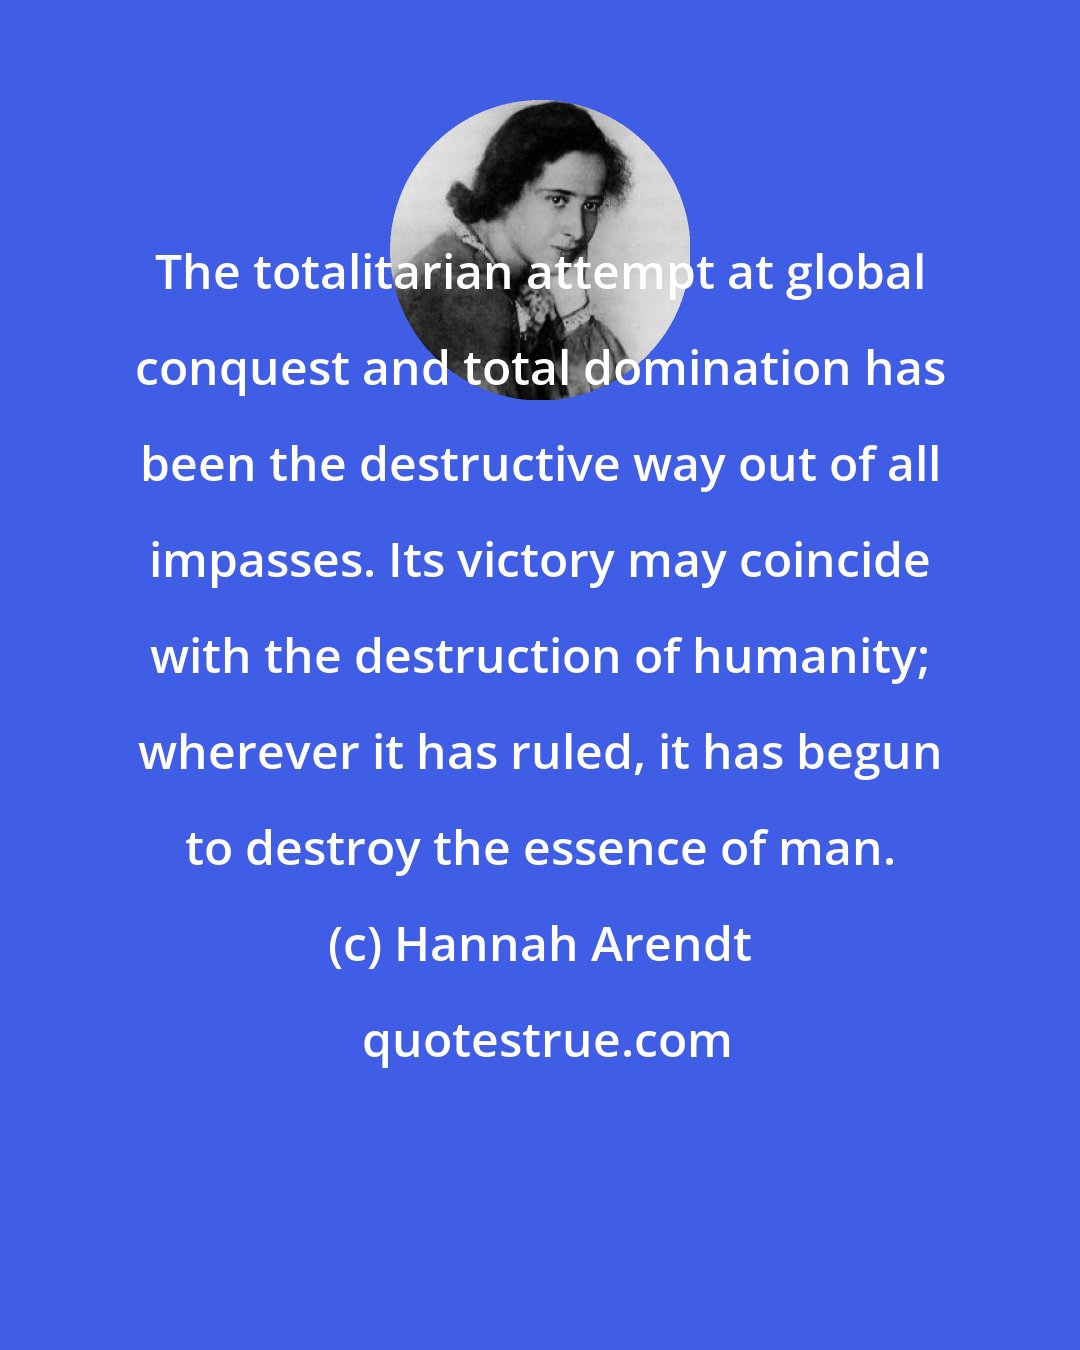 Hannah Arendt: The totalitarian attempt at global conquest and total domination has been the destructive way out of all impasses. Its victory may coincide with the destruction of humanity; wherever it has ruled, it has begun to destroy the essence of man.